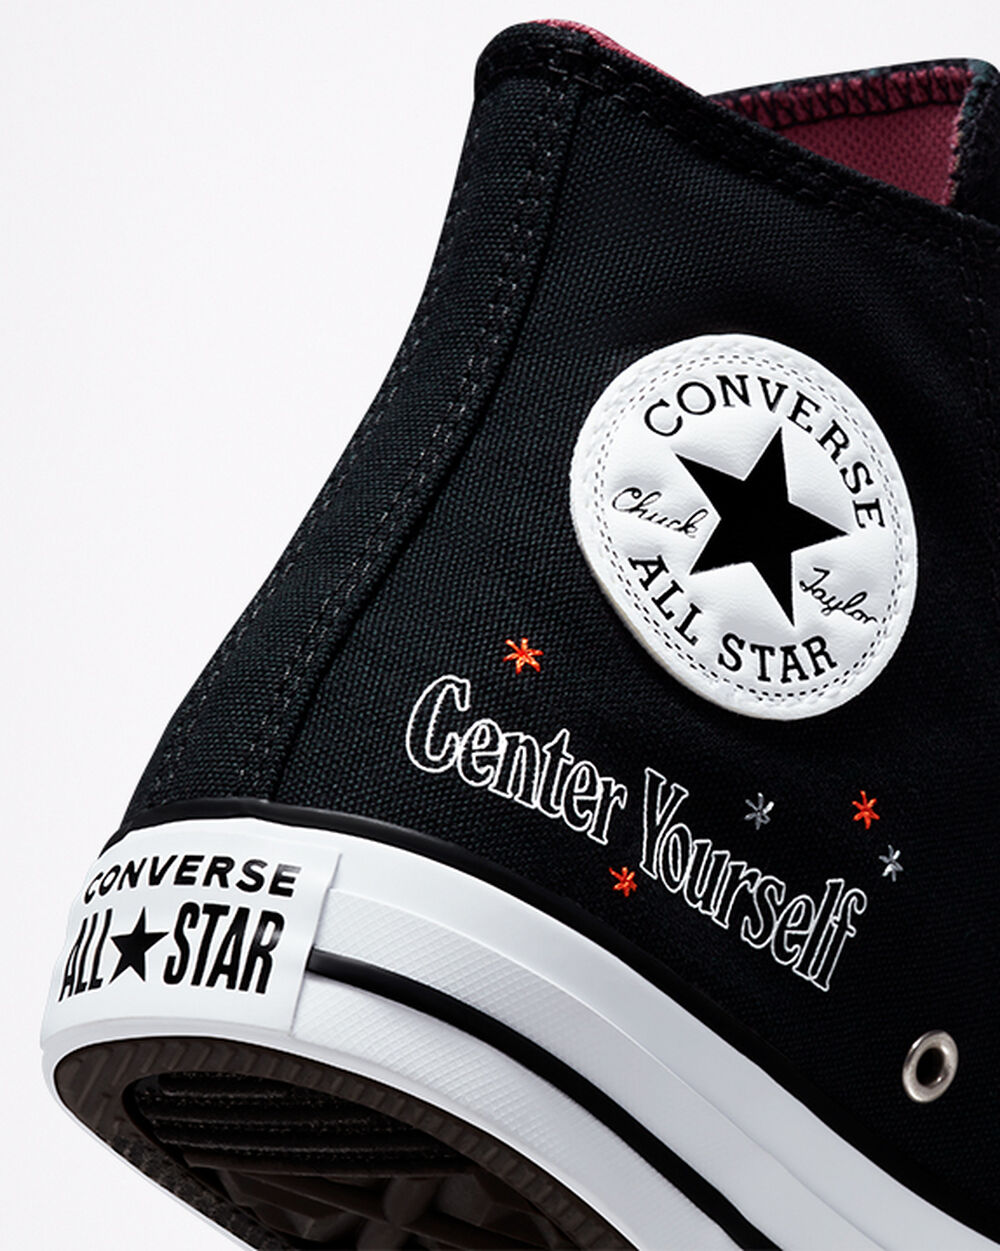 Tenis Converse Chuck Taylor All Star Mujer Negros Blancos Grises | Mexico-418026